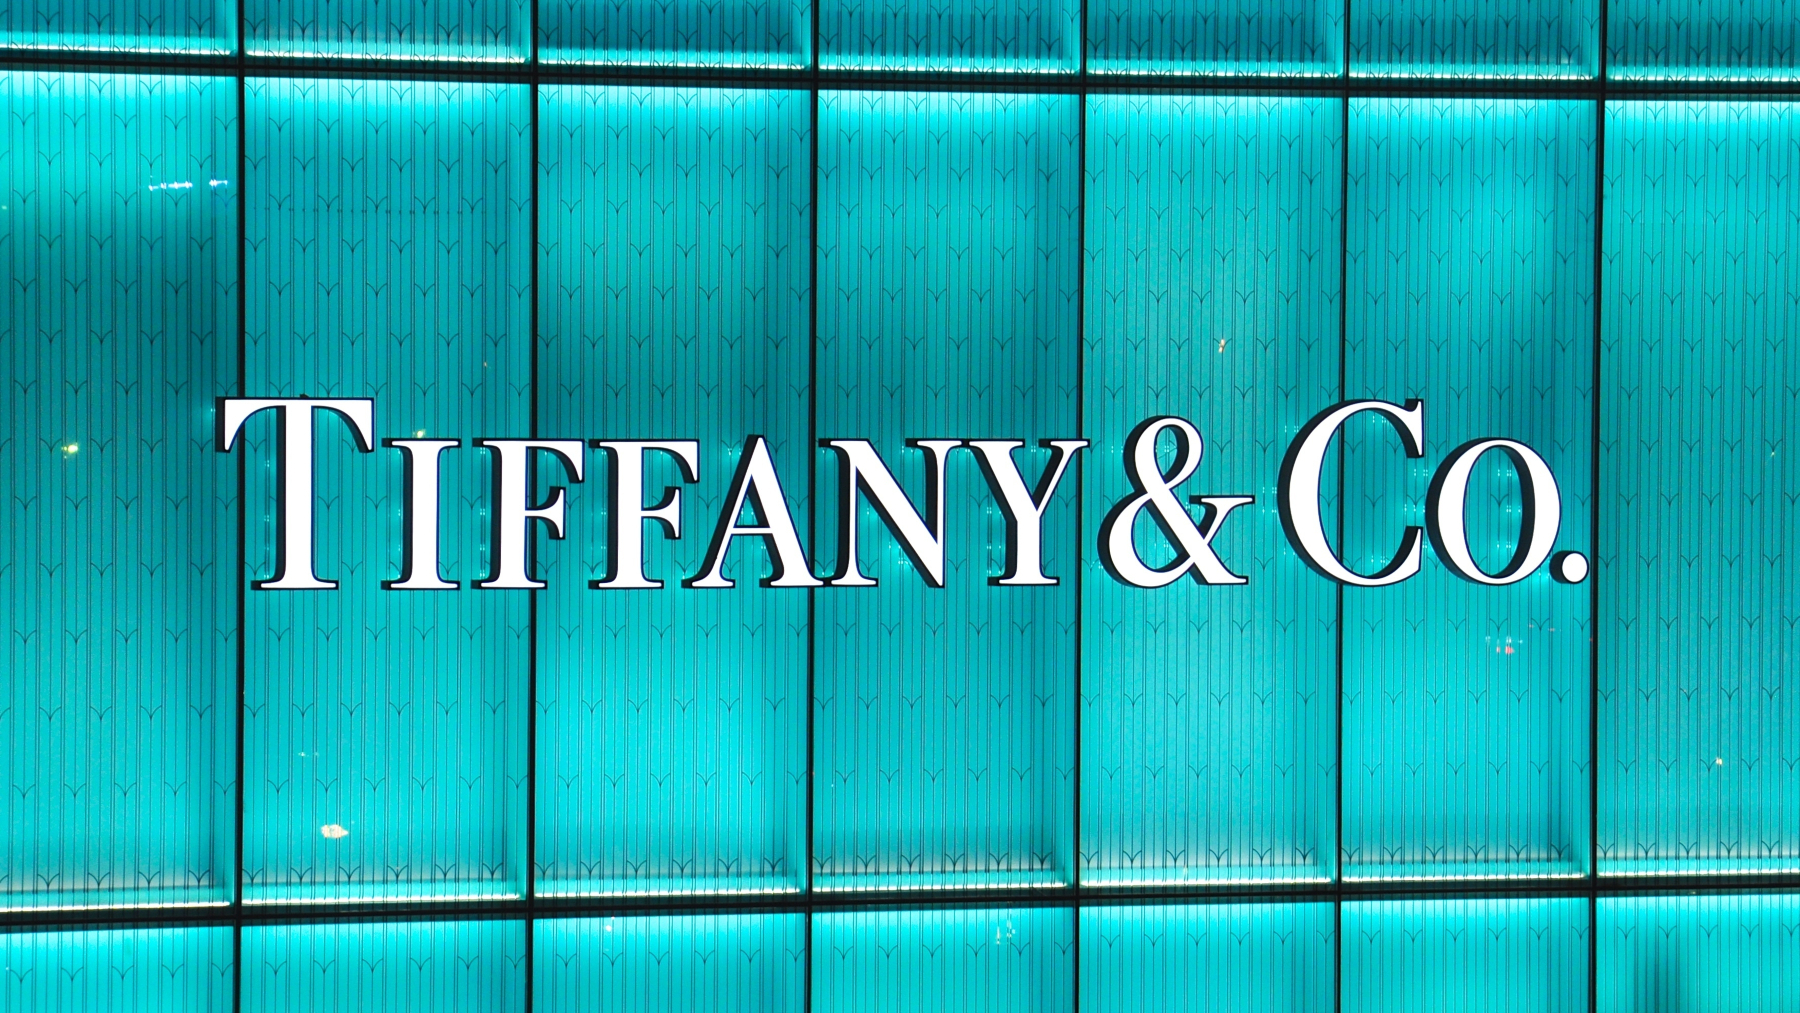 LVMH to buy French jewellery producer Platinum Invest to ramp up Tiffany  production